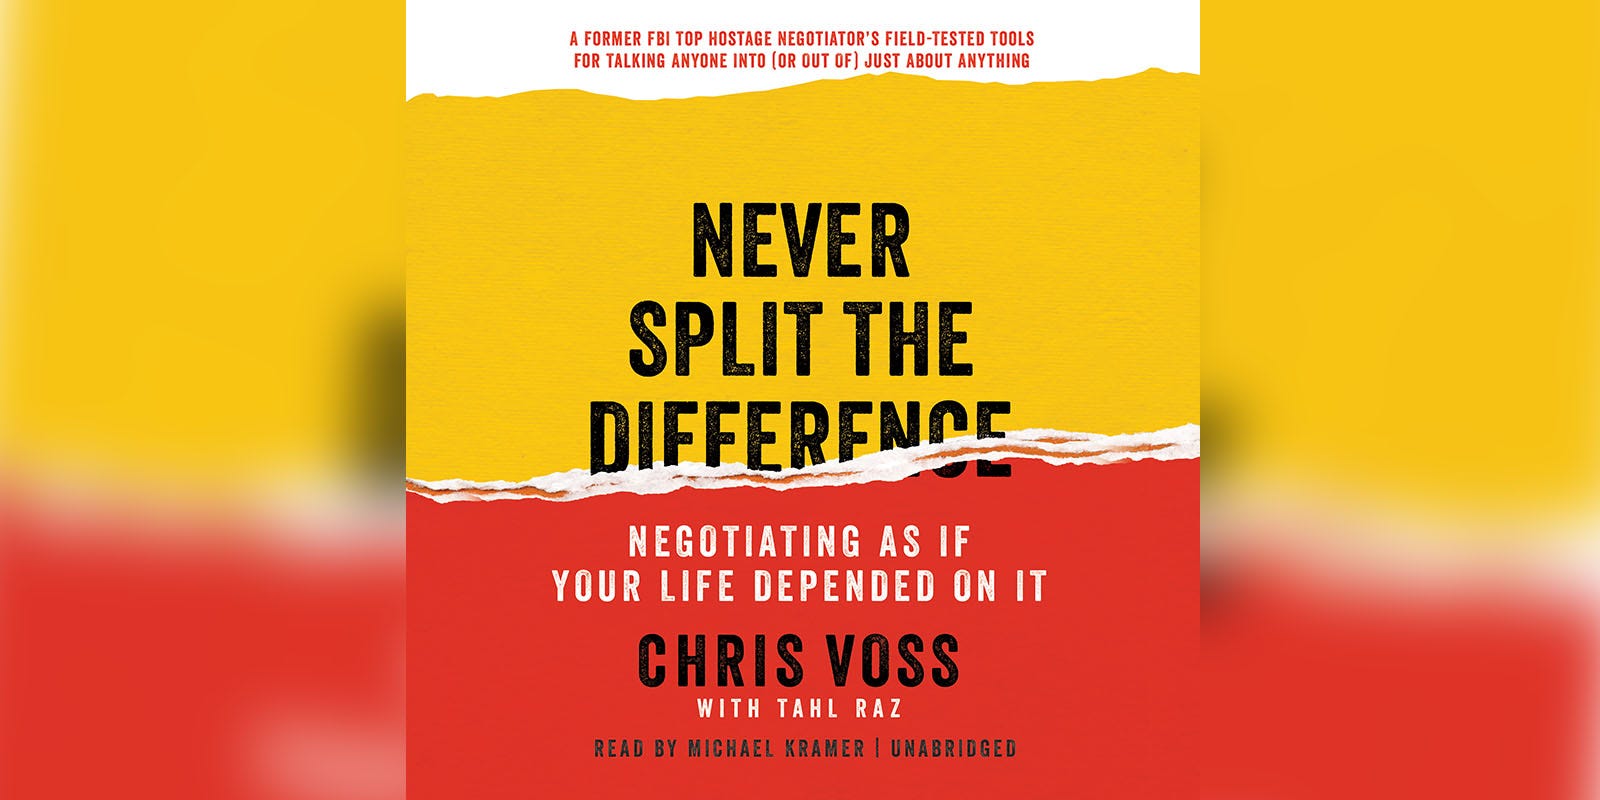 Never Split the Difference: Negotiating as if Your Life Depended on It  (Paperback)